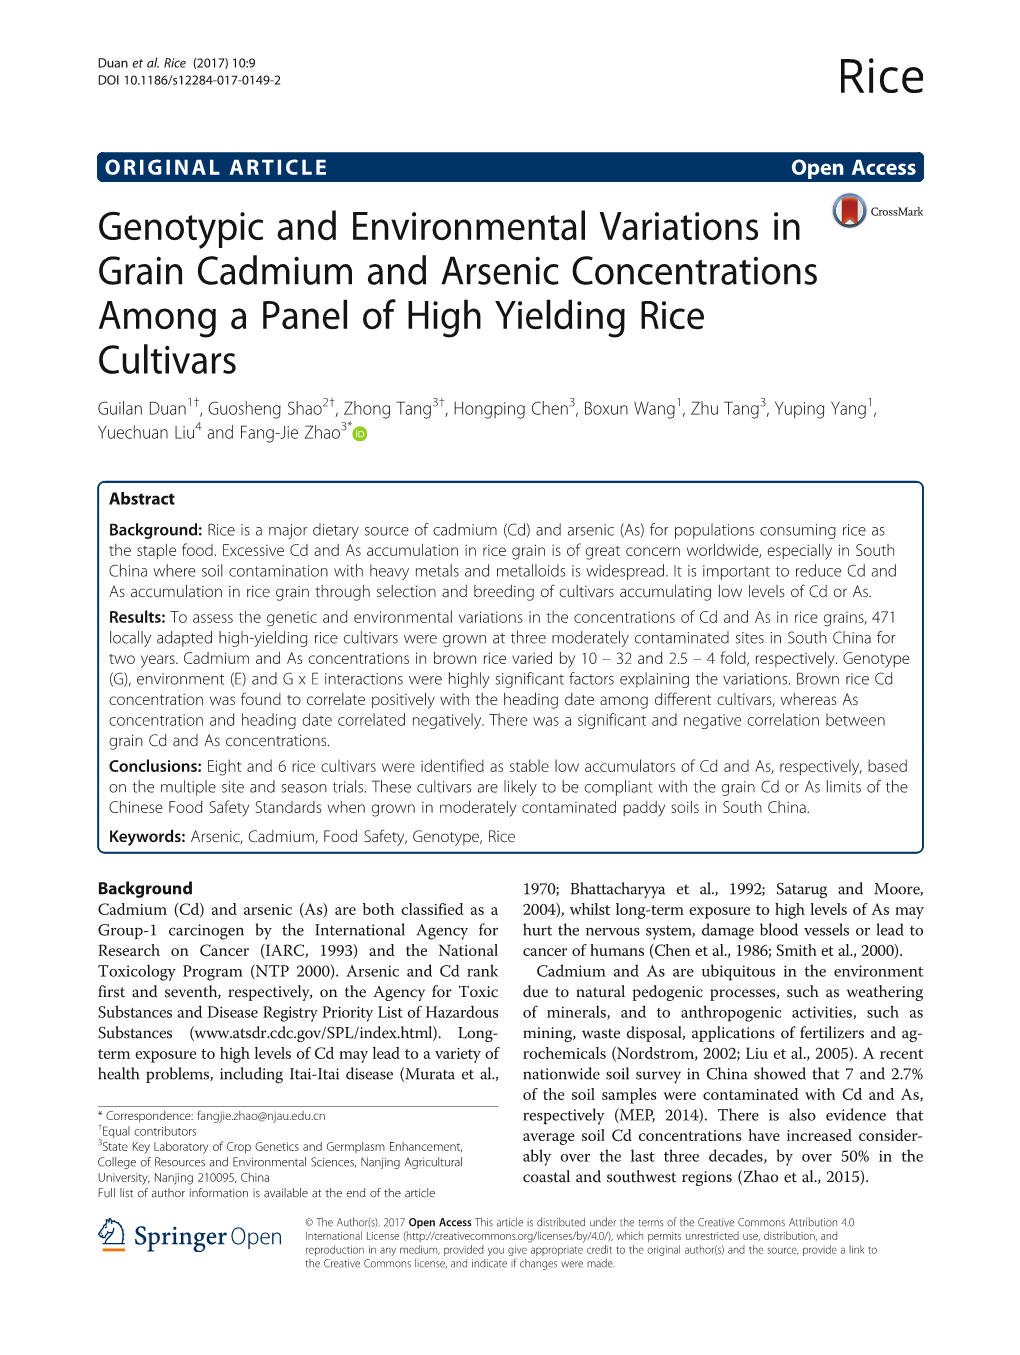 Genotypic and Environmental Variations in Grain Cadmium And